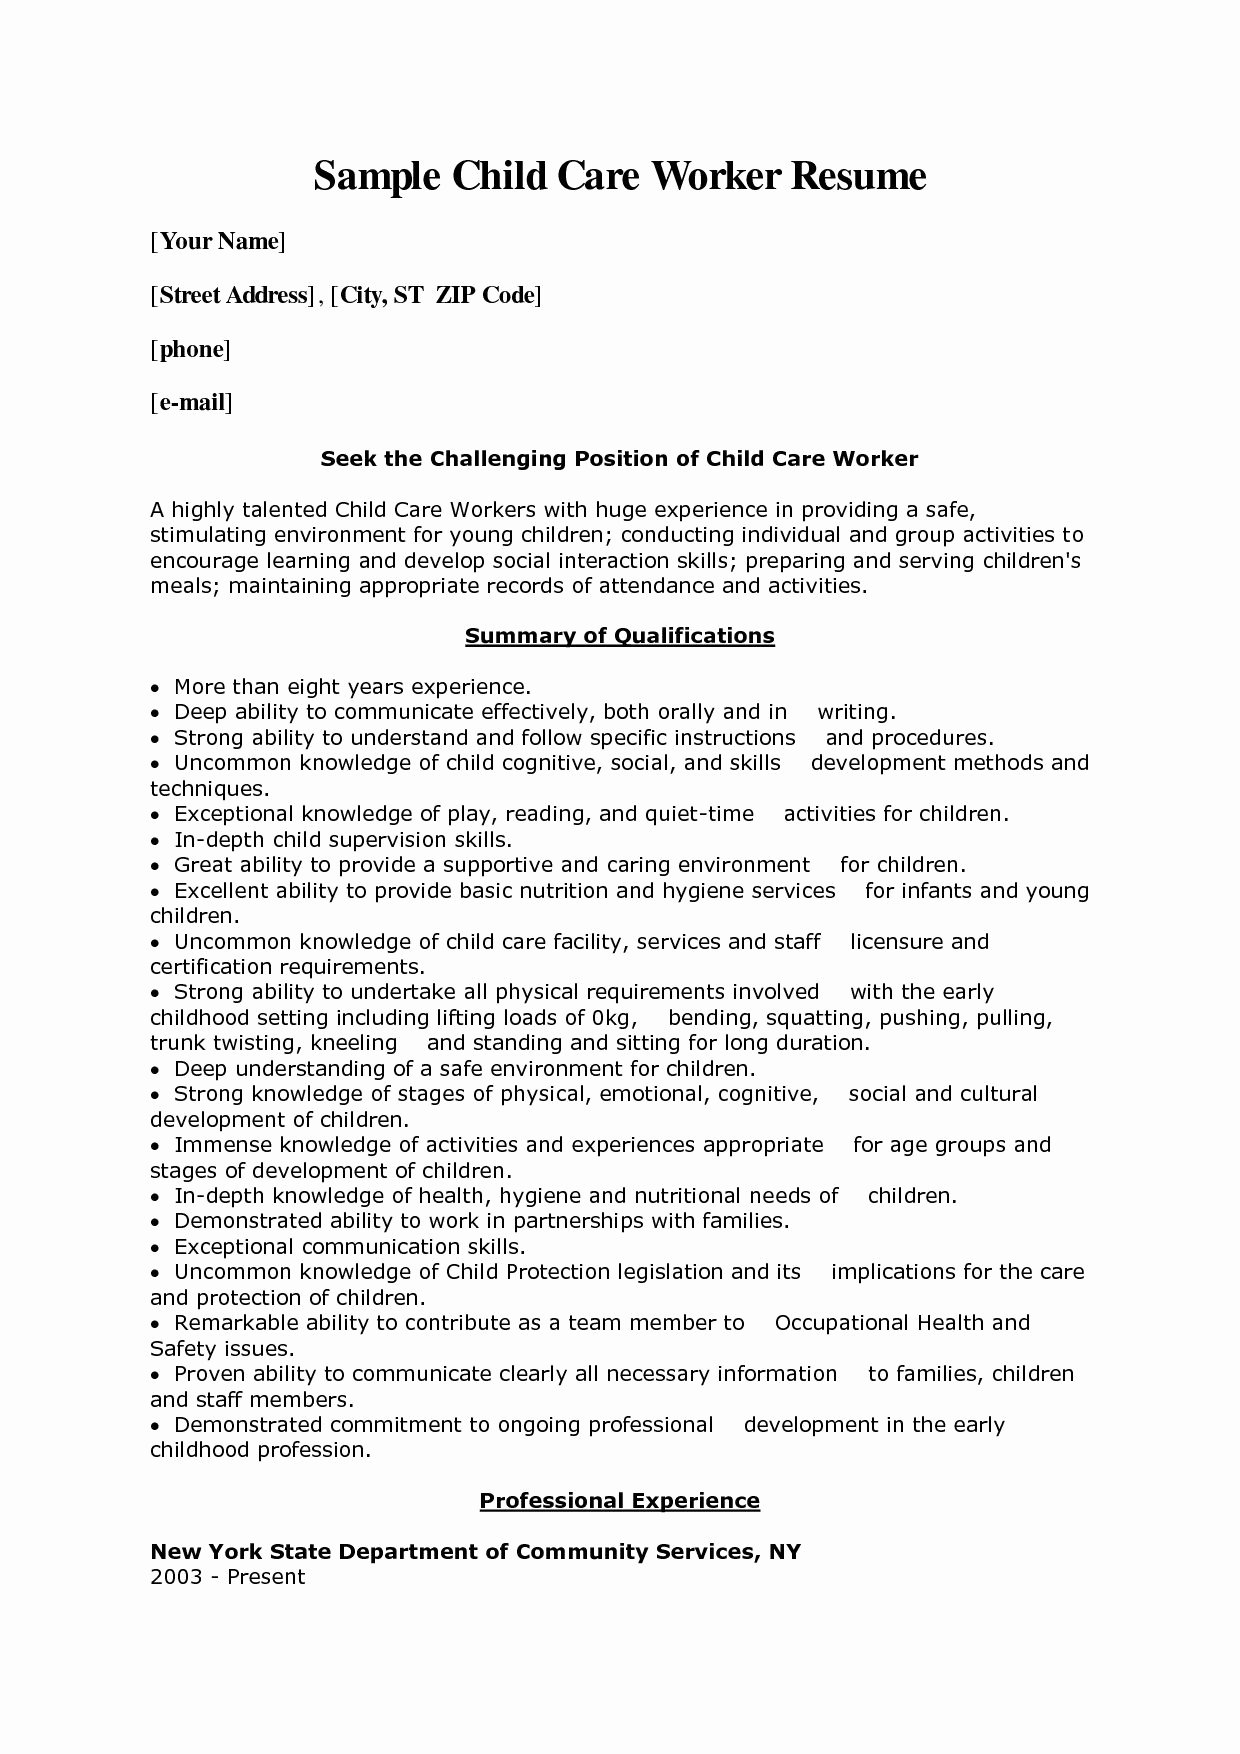 Child Care Worker Cover Letter Sample Child Care Worker